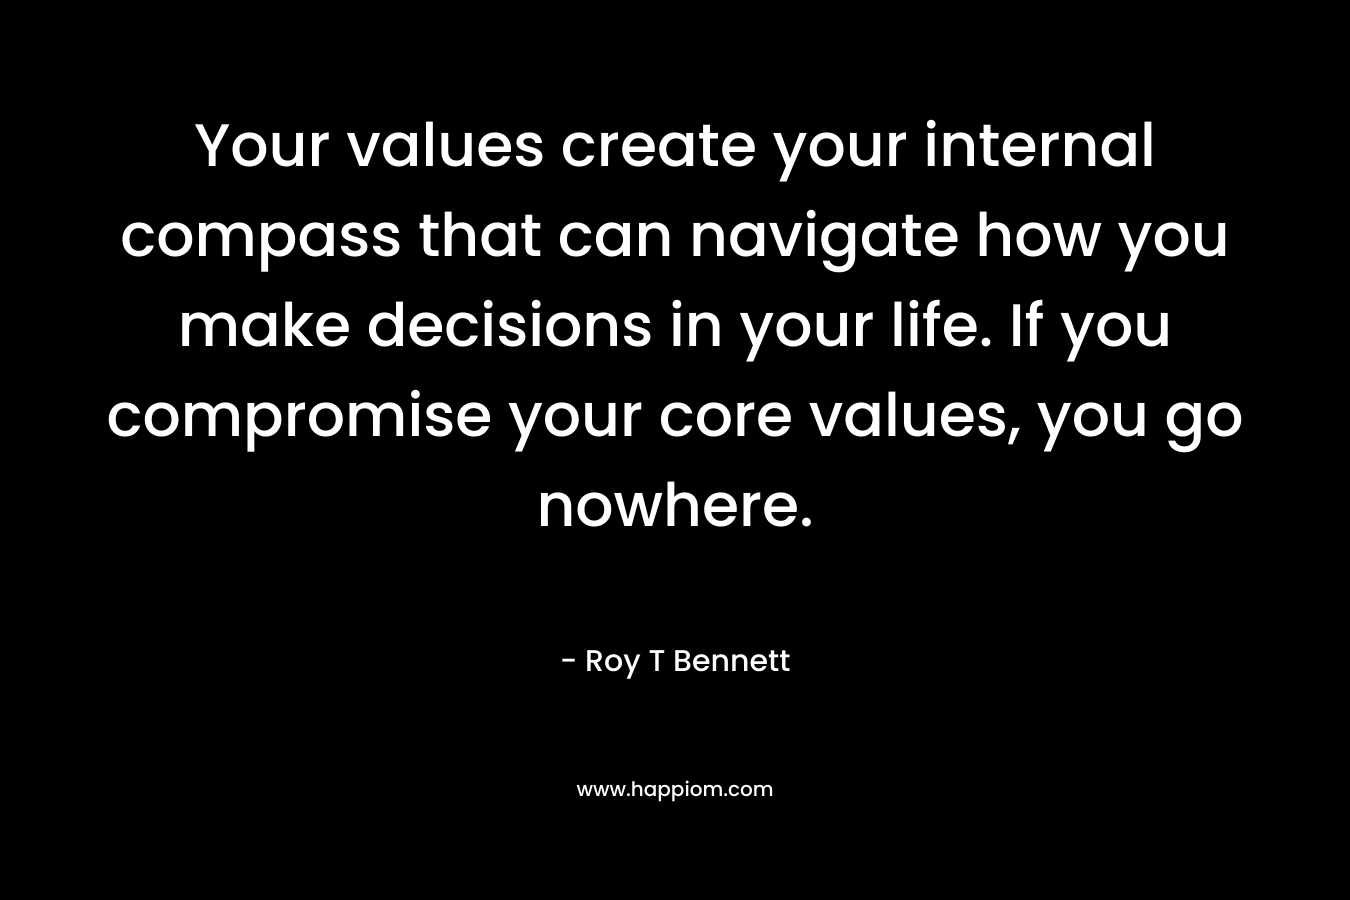 Your values create your internal compass that can navigate how you make decisions in your life. If you compromise your core values, you go nowhere. – Roy T Bennett